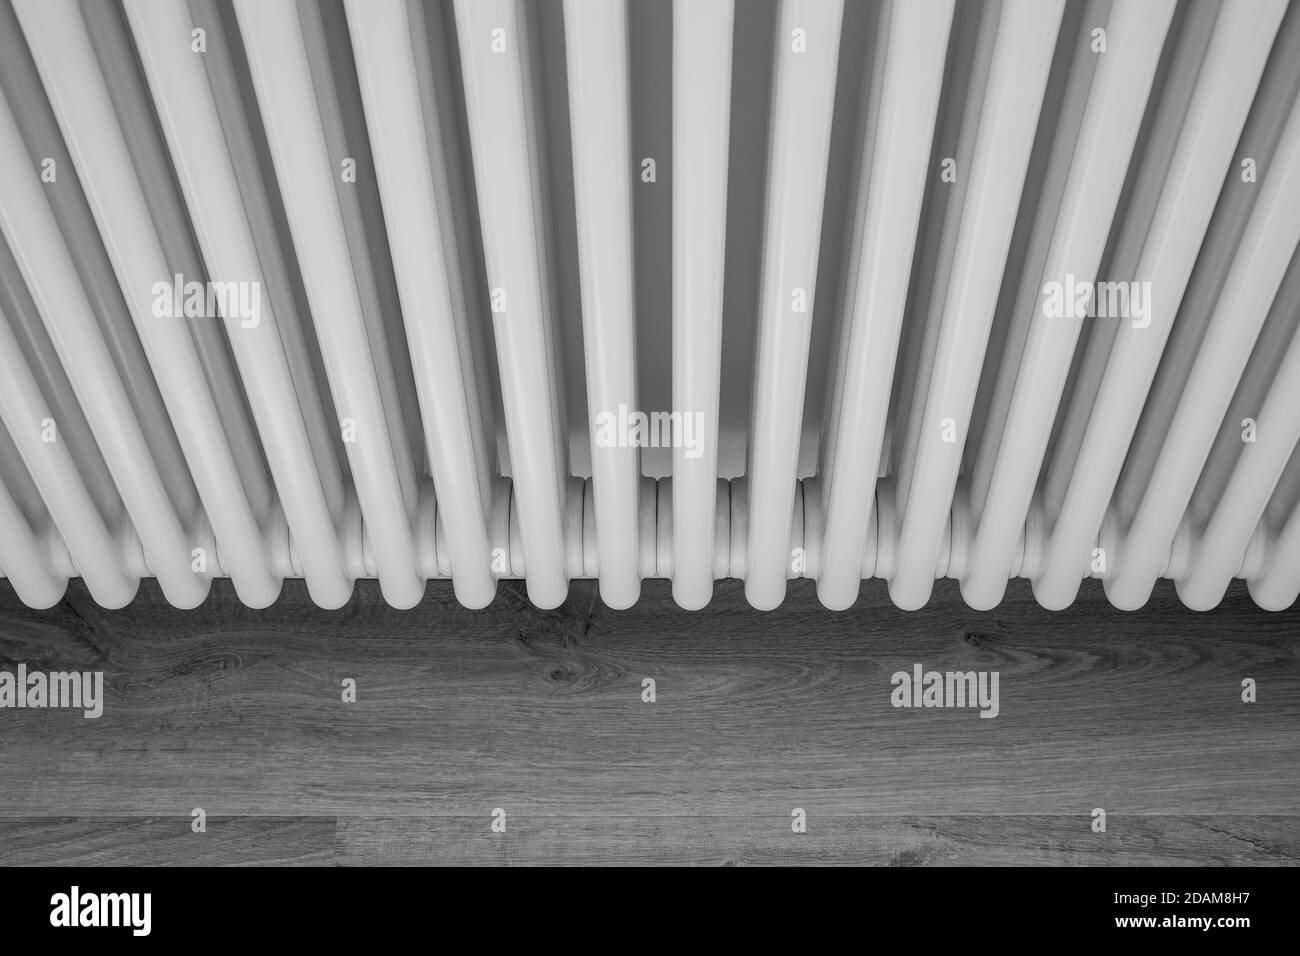 Black and white image of a radiator pipes over parquet floor Stock Photo